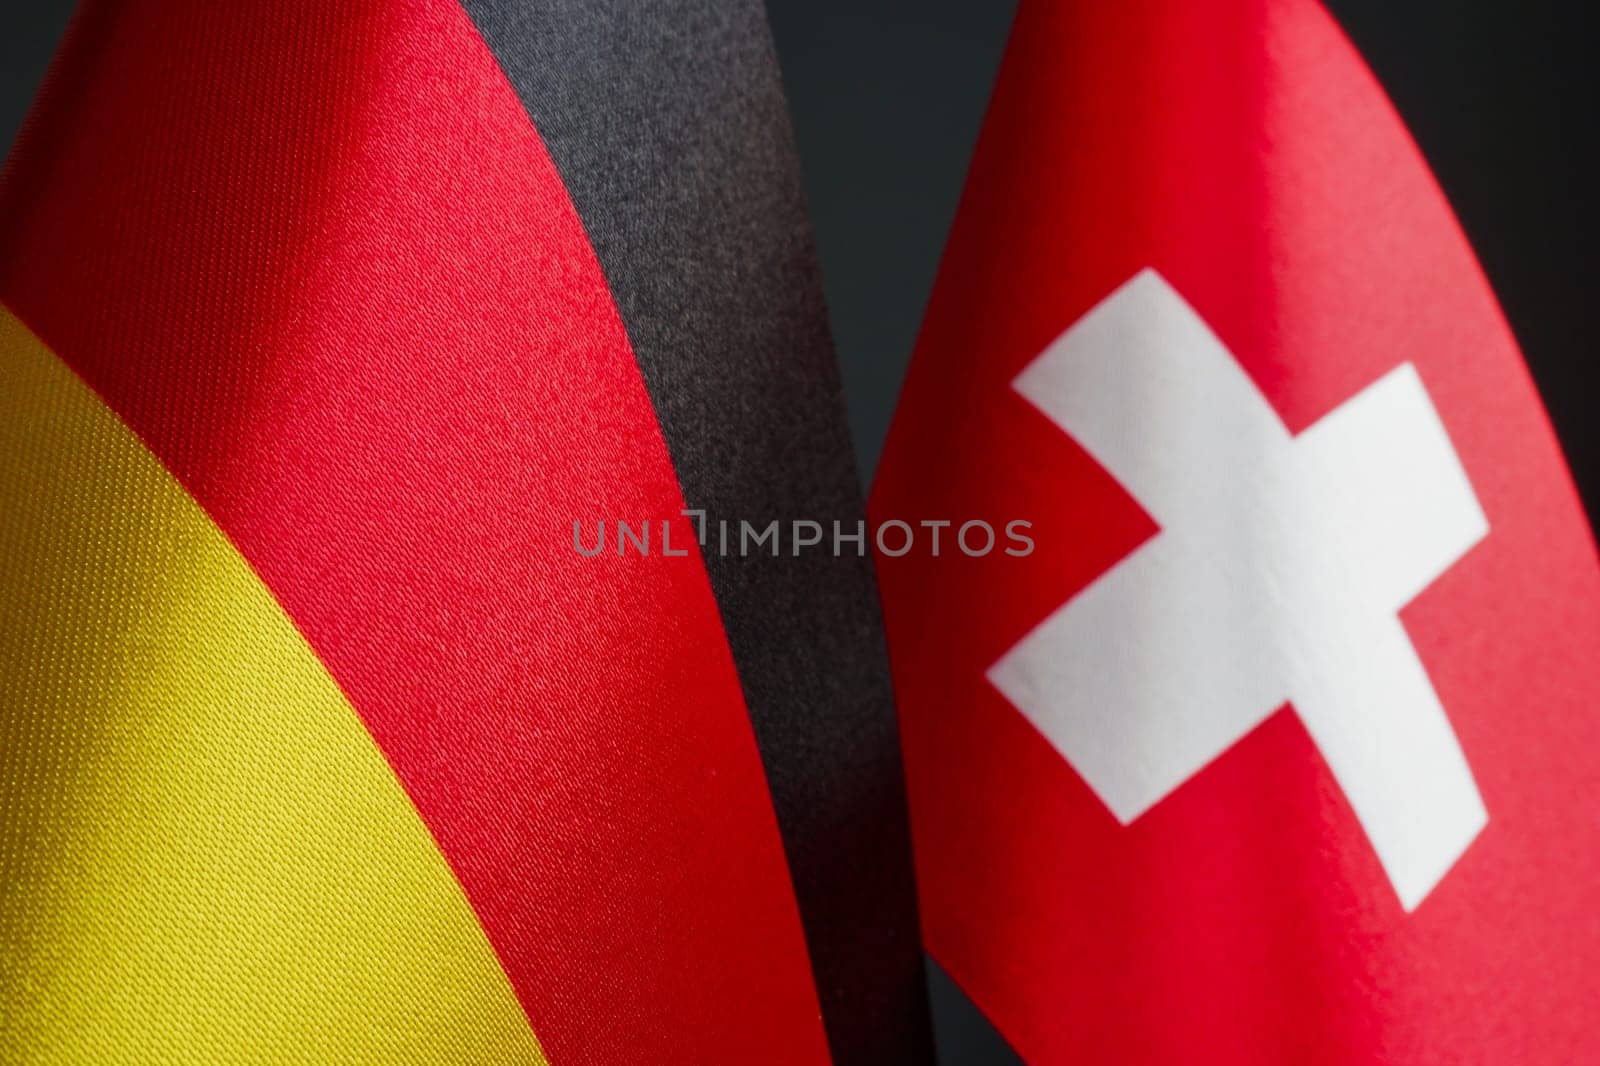 Nearby are small flags of Germany and Switzerland. by designer491